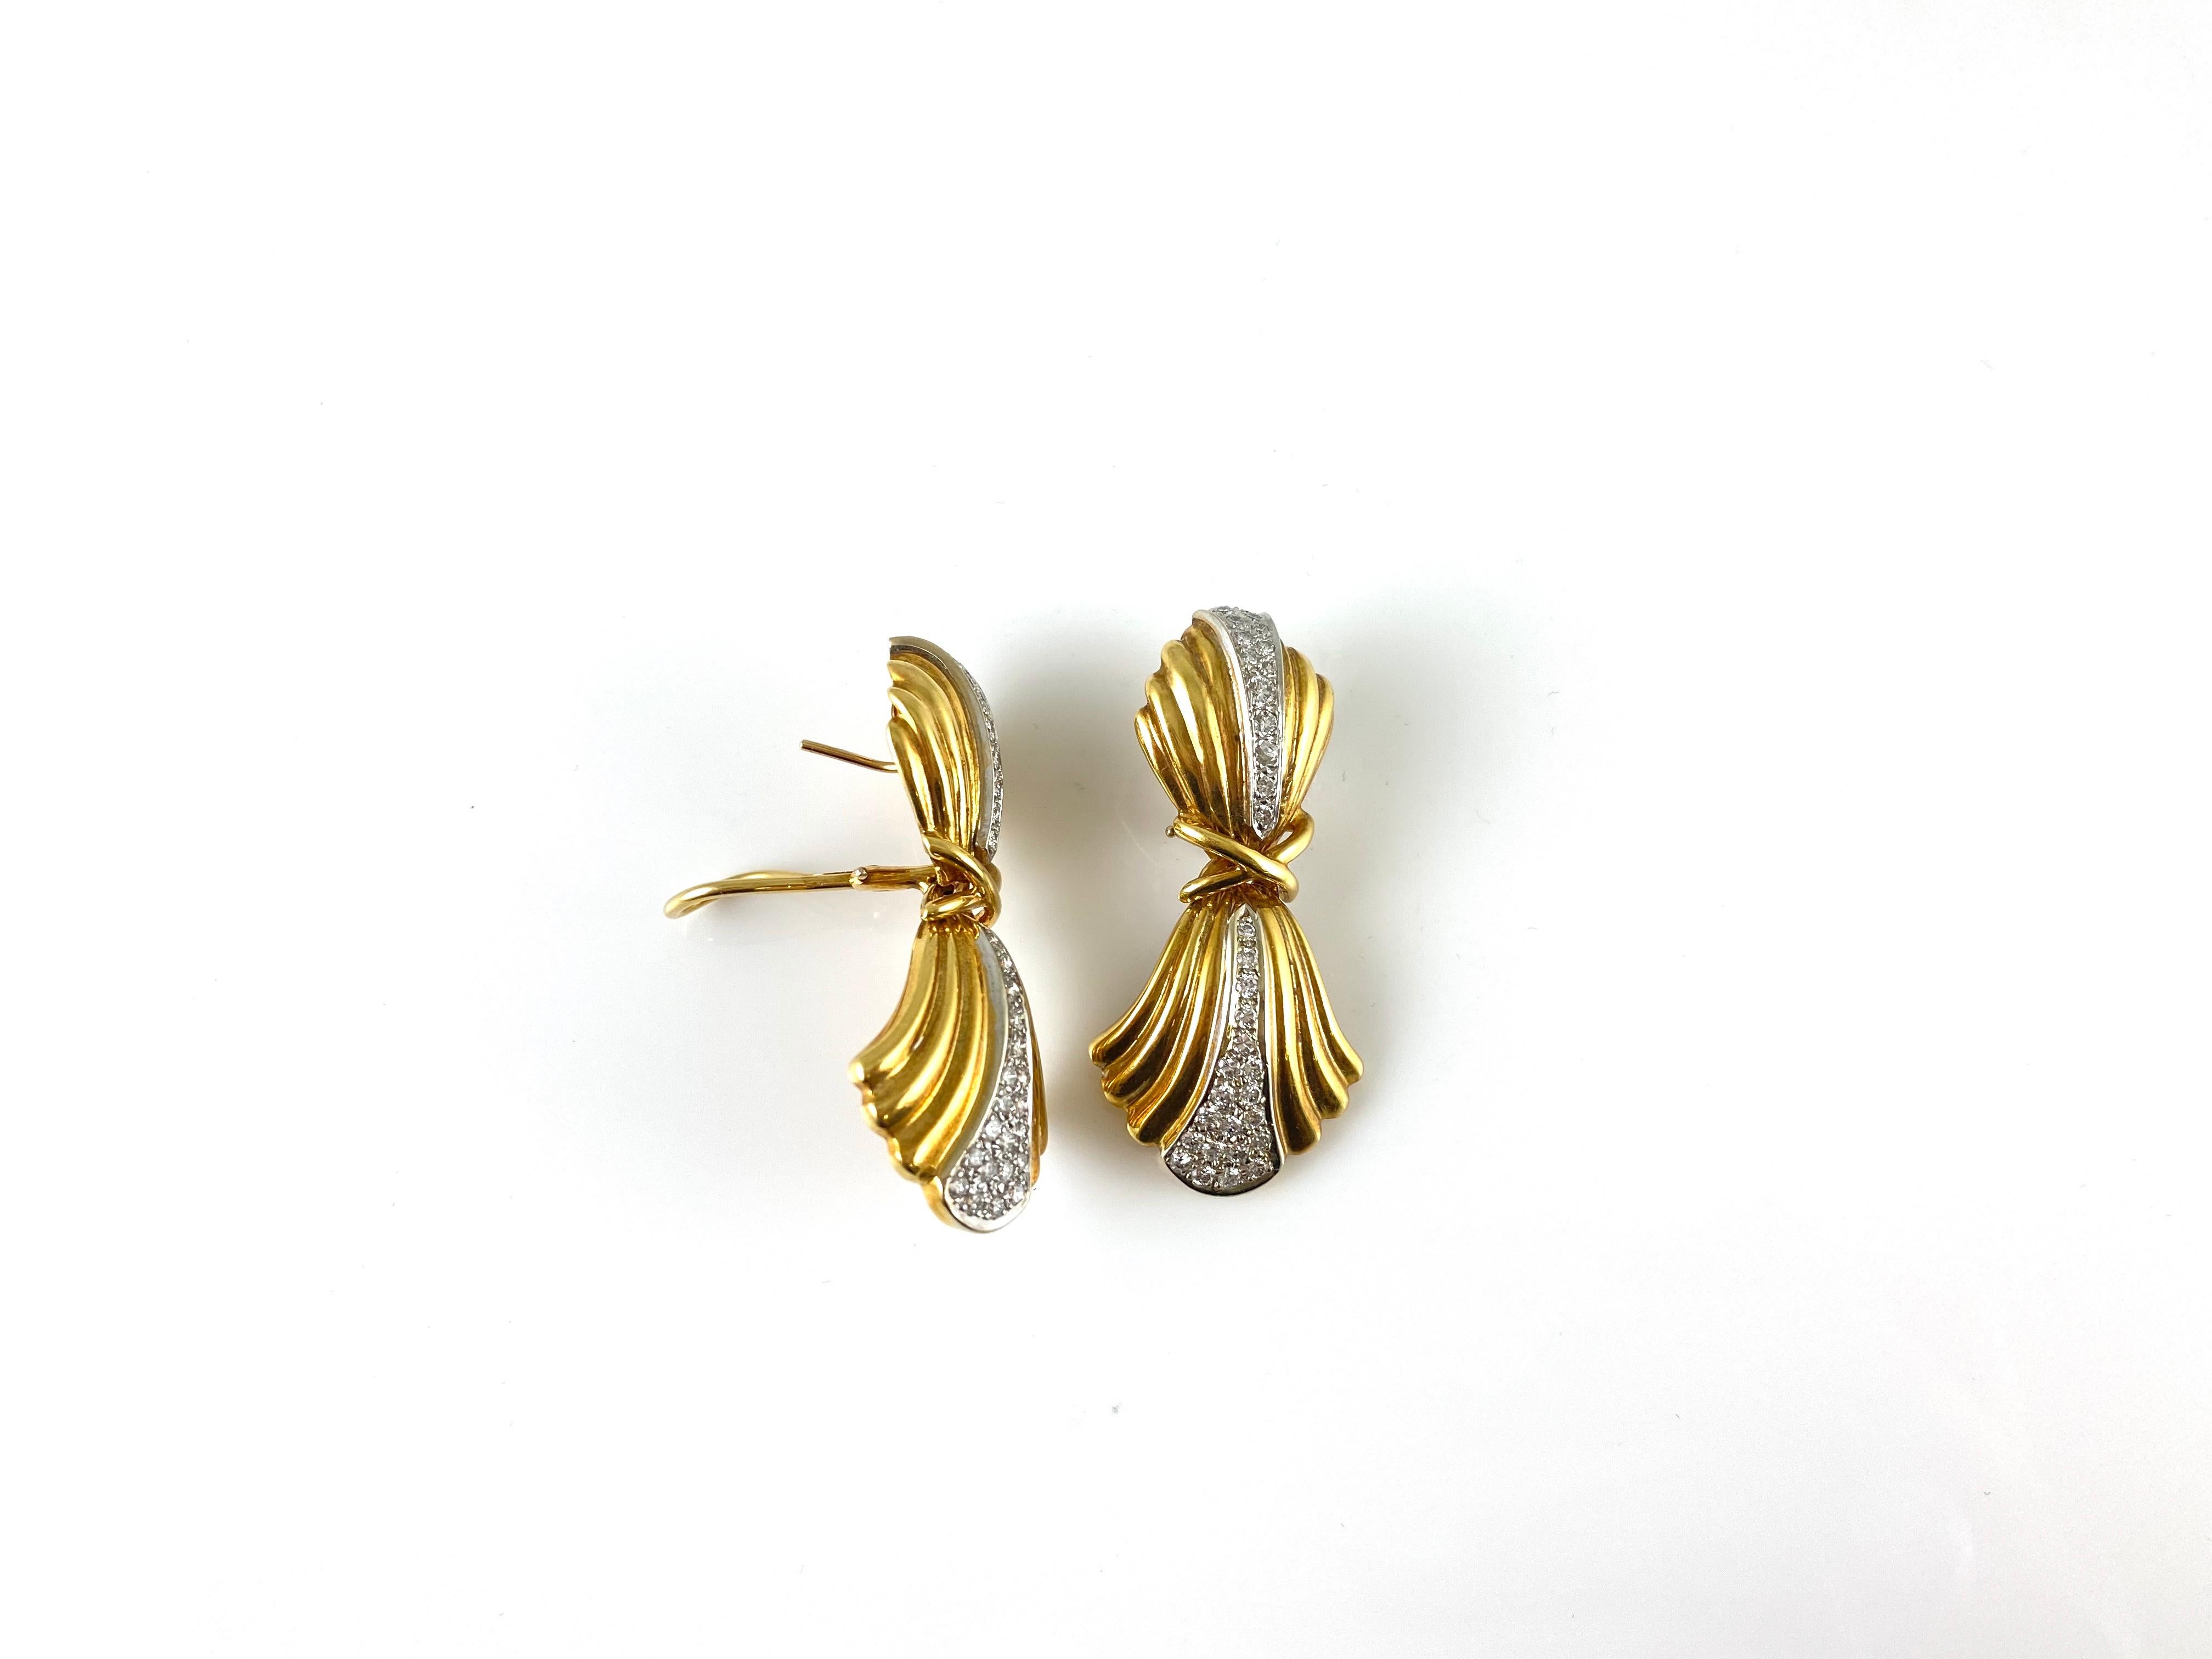 The earrings are finely crafted in 18k yellow gold with diamonds weighing approximately total of 2.00 carat.
Circa 1970.